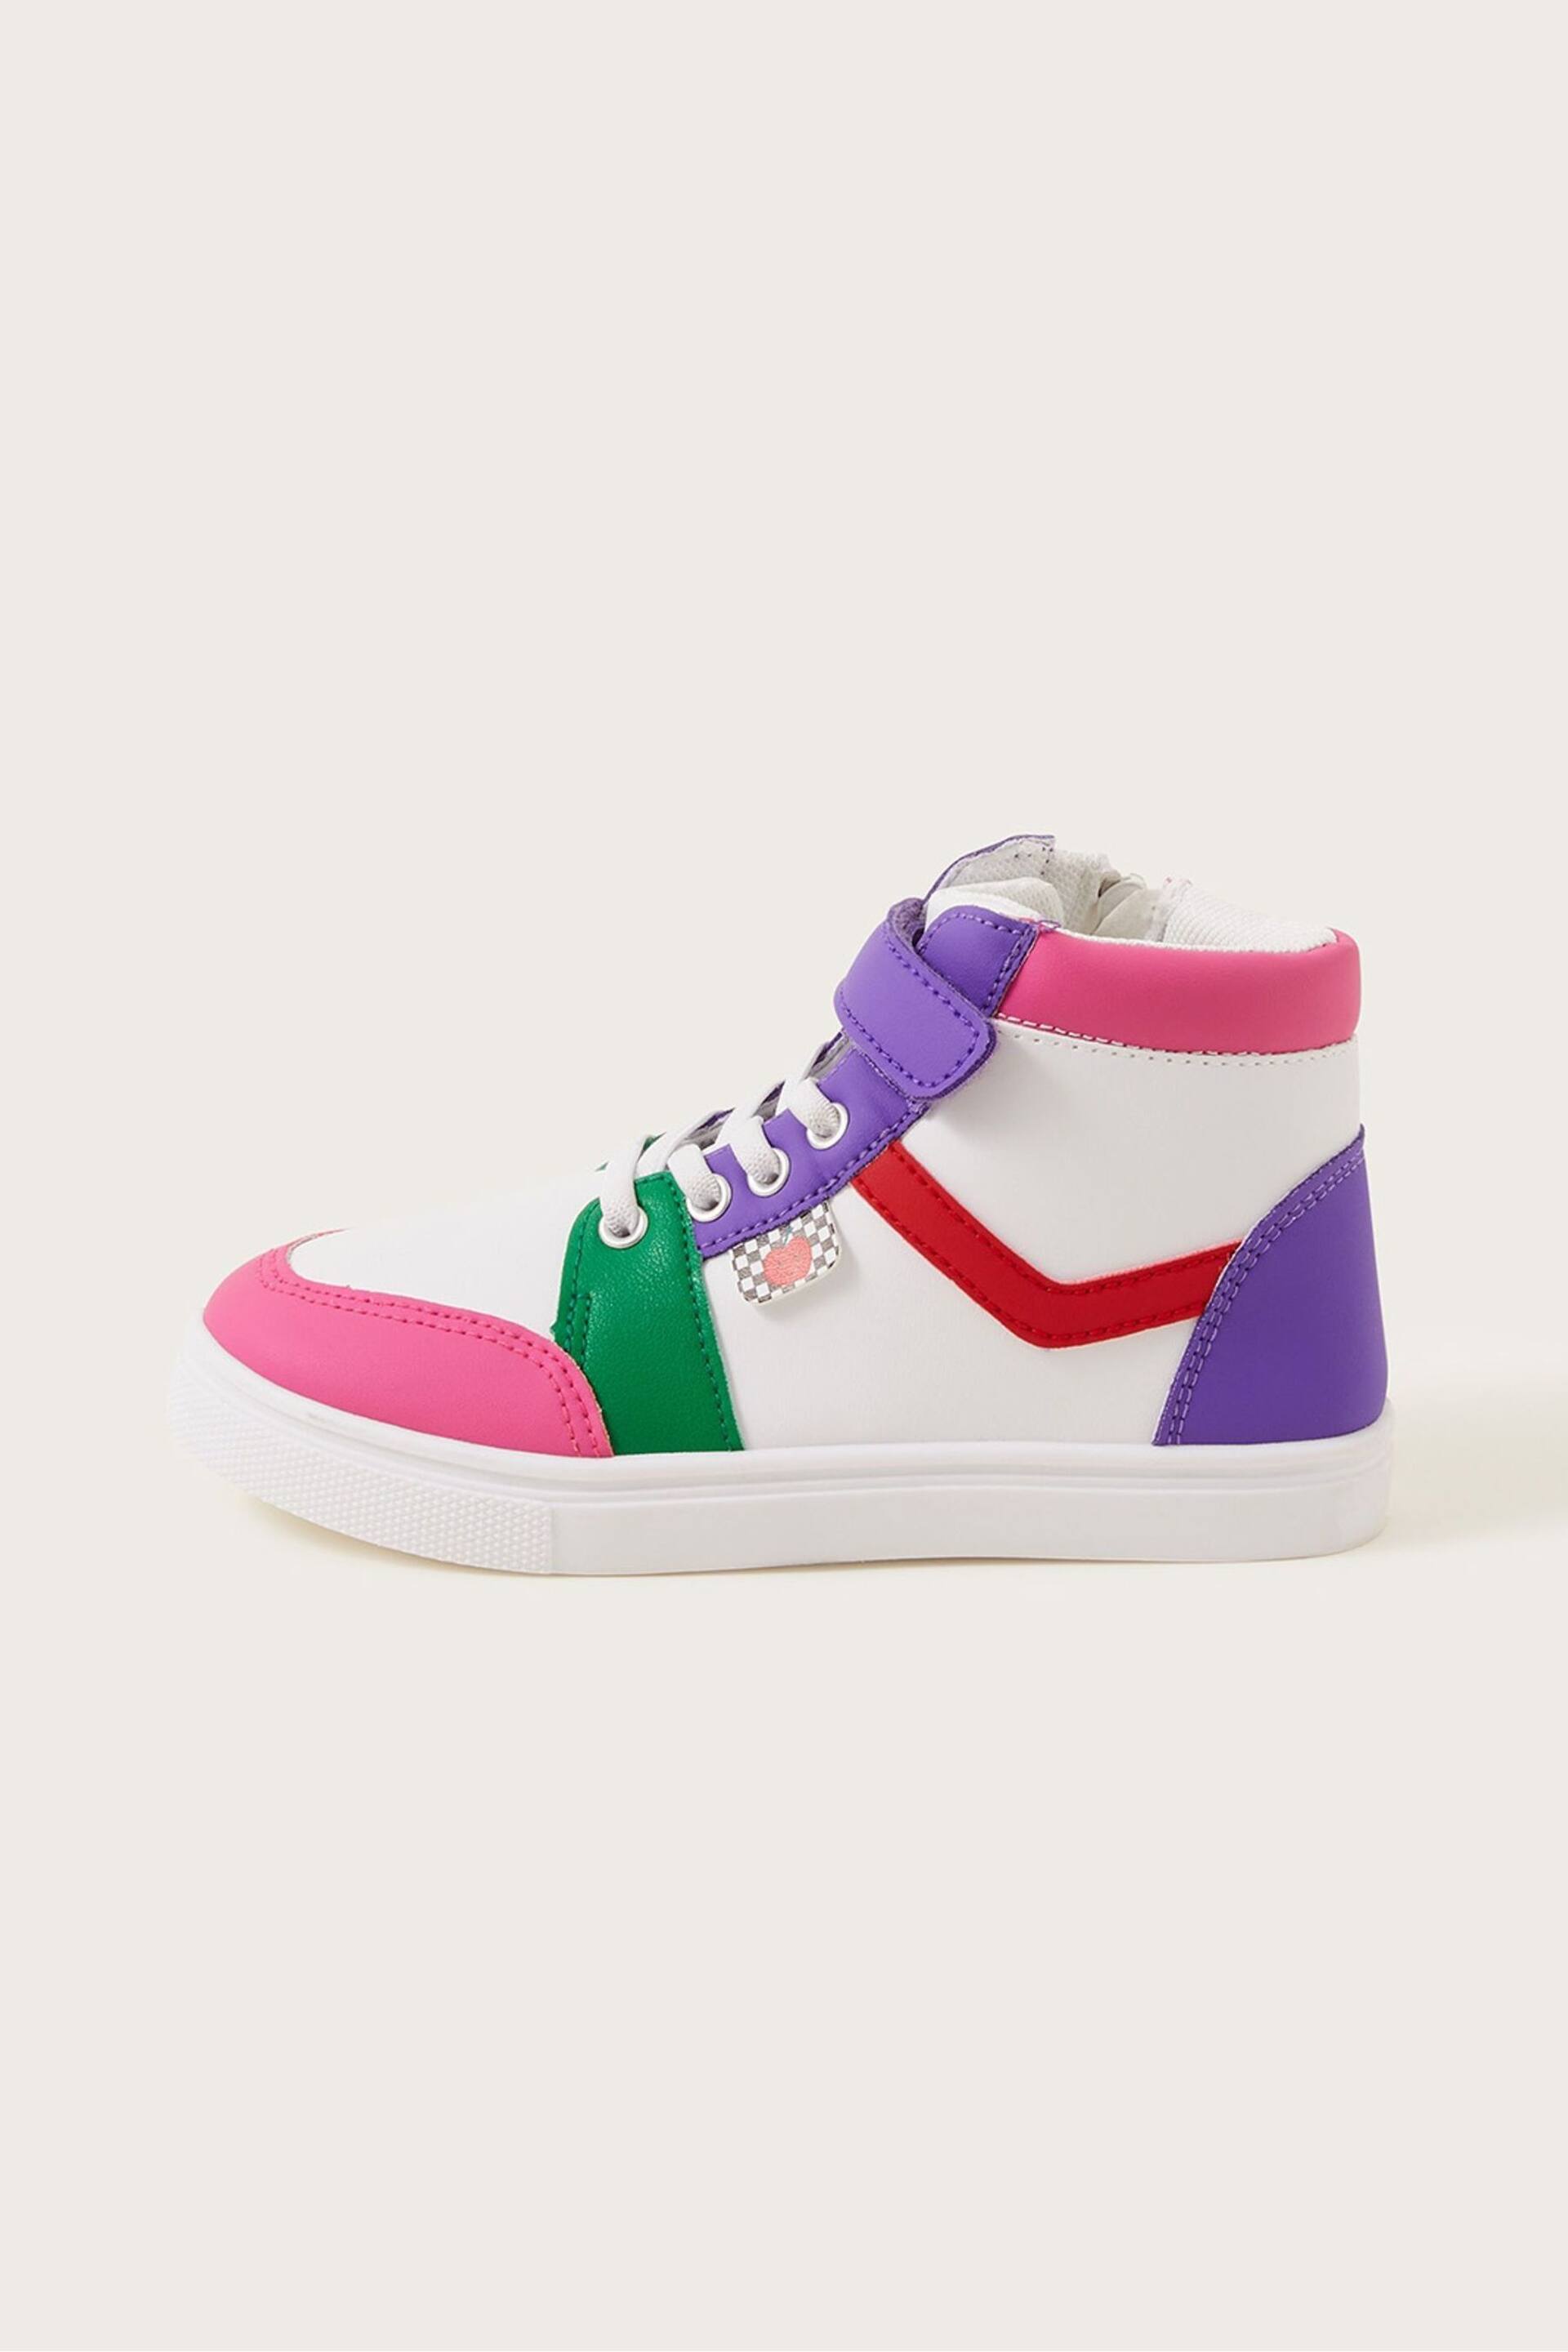 Monsoon Pink High Top Trainers - Image 1 of 3